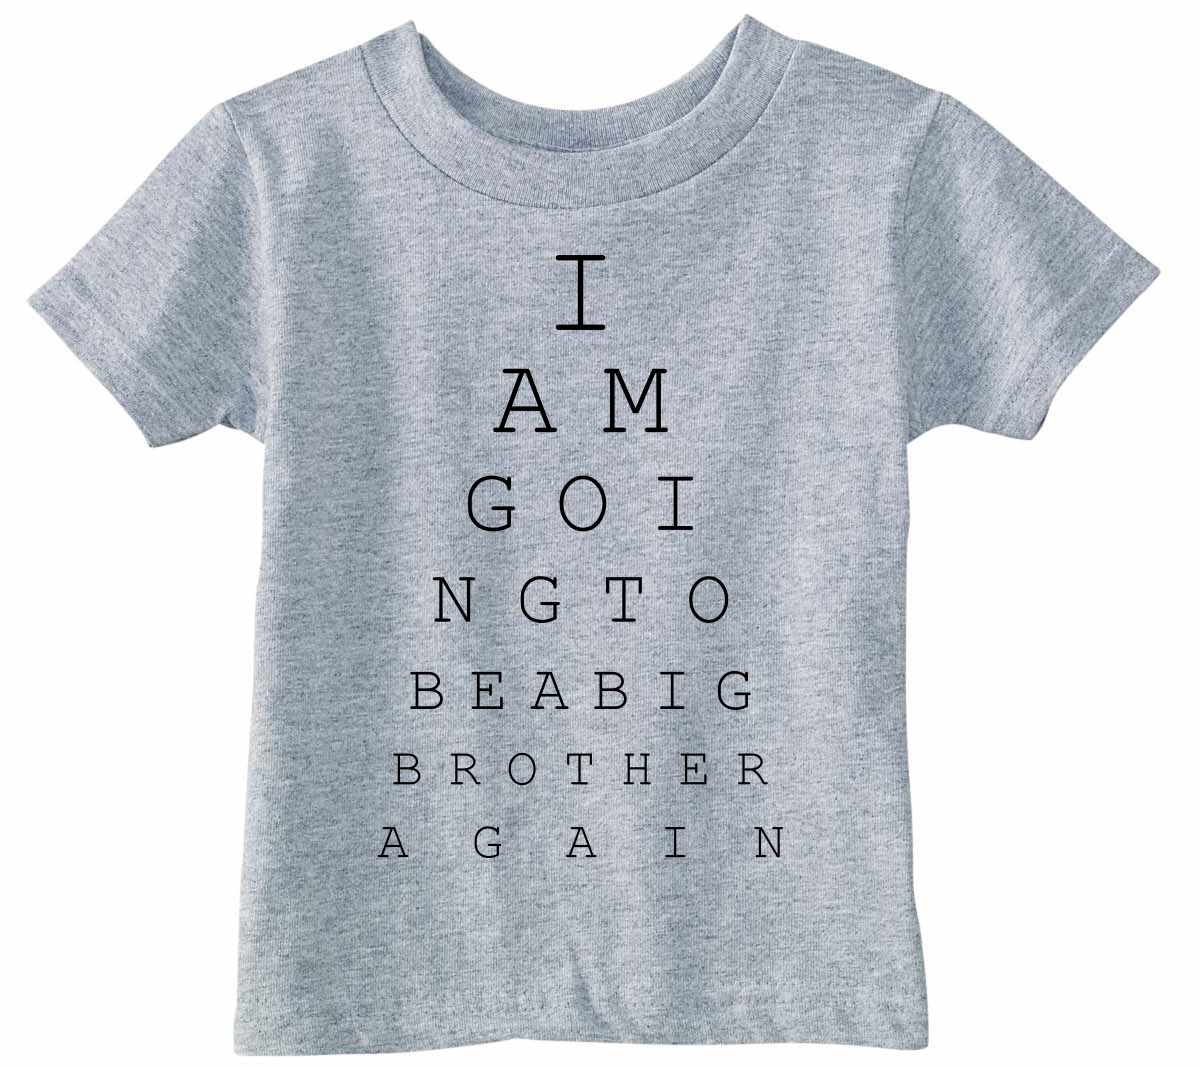 Big Brother Again Eye Chart on Infant-Toddler T-Shirt